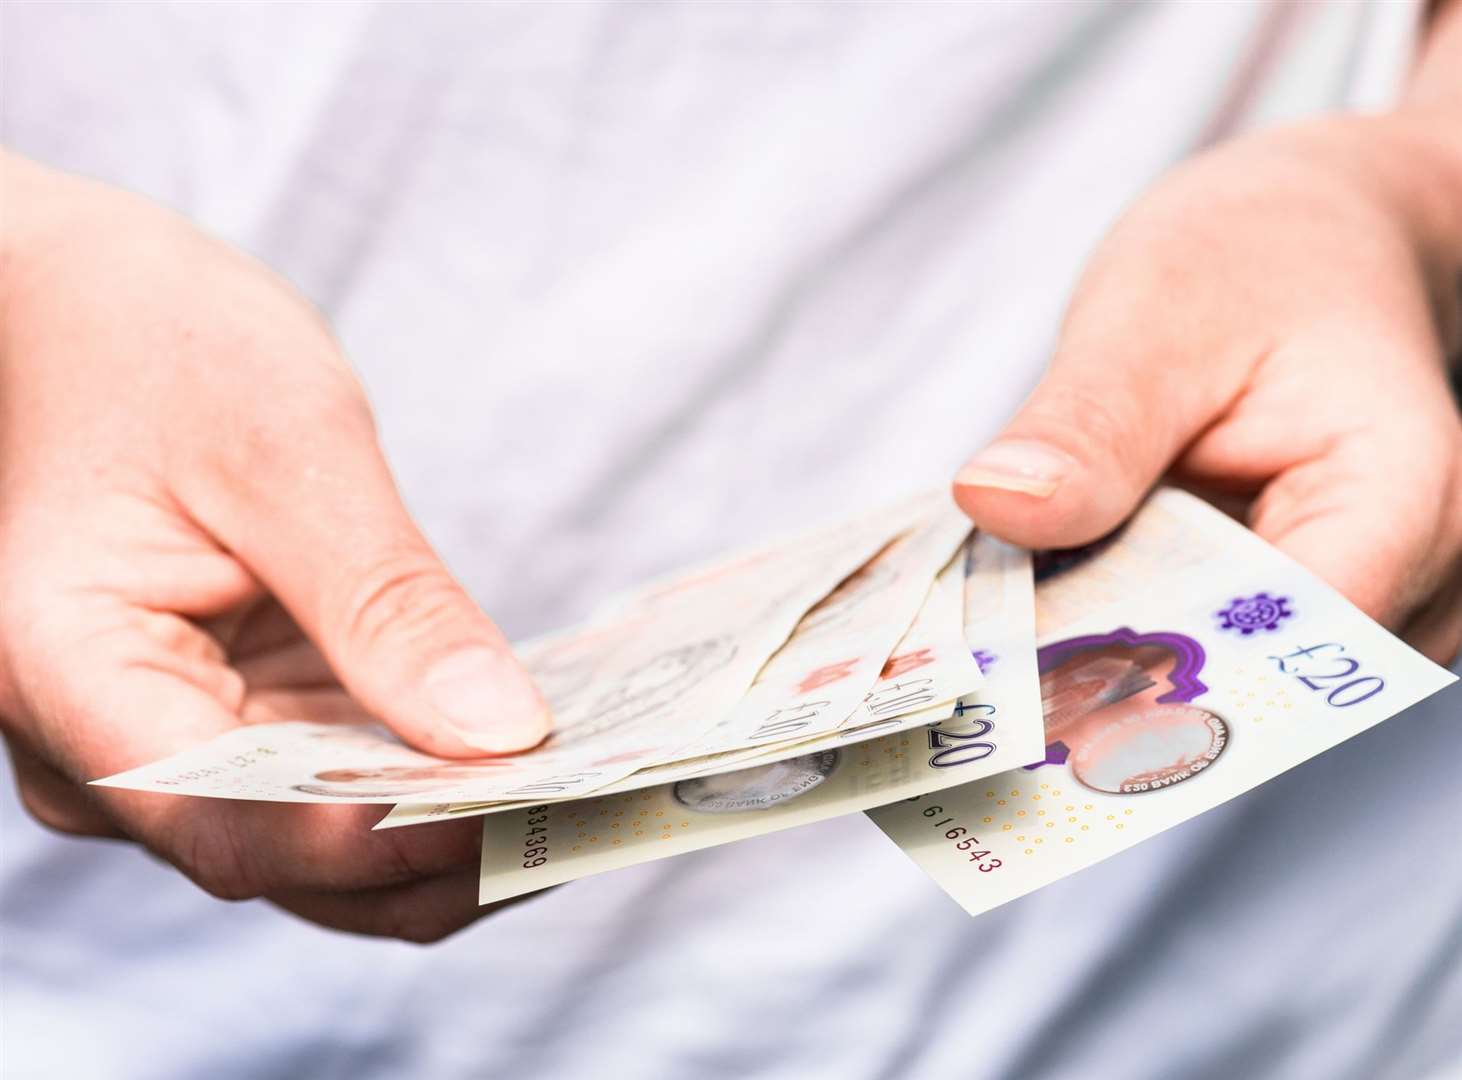 Hard cash is no longer accepted in some businesses. Picture: iStock